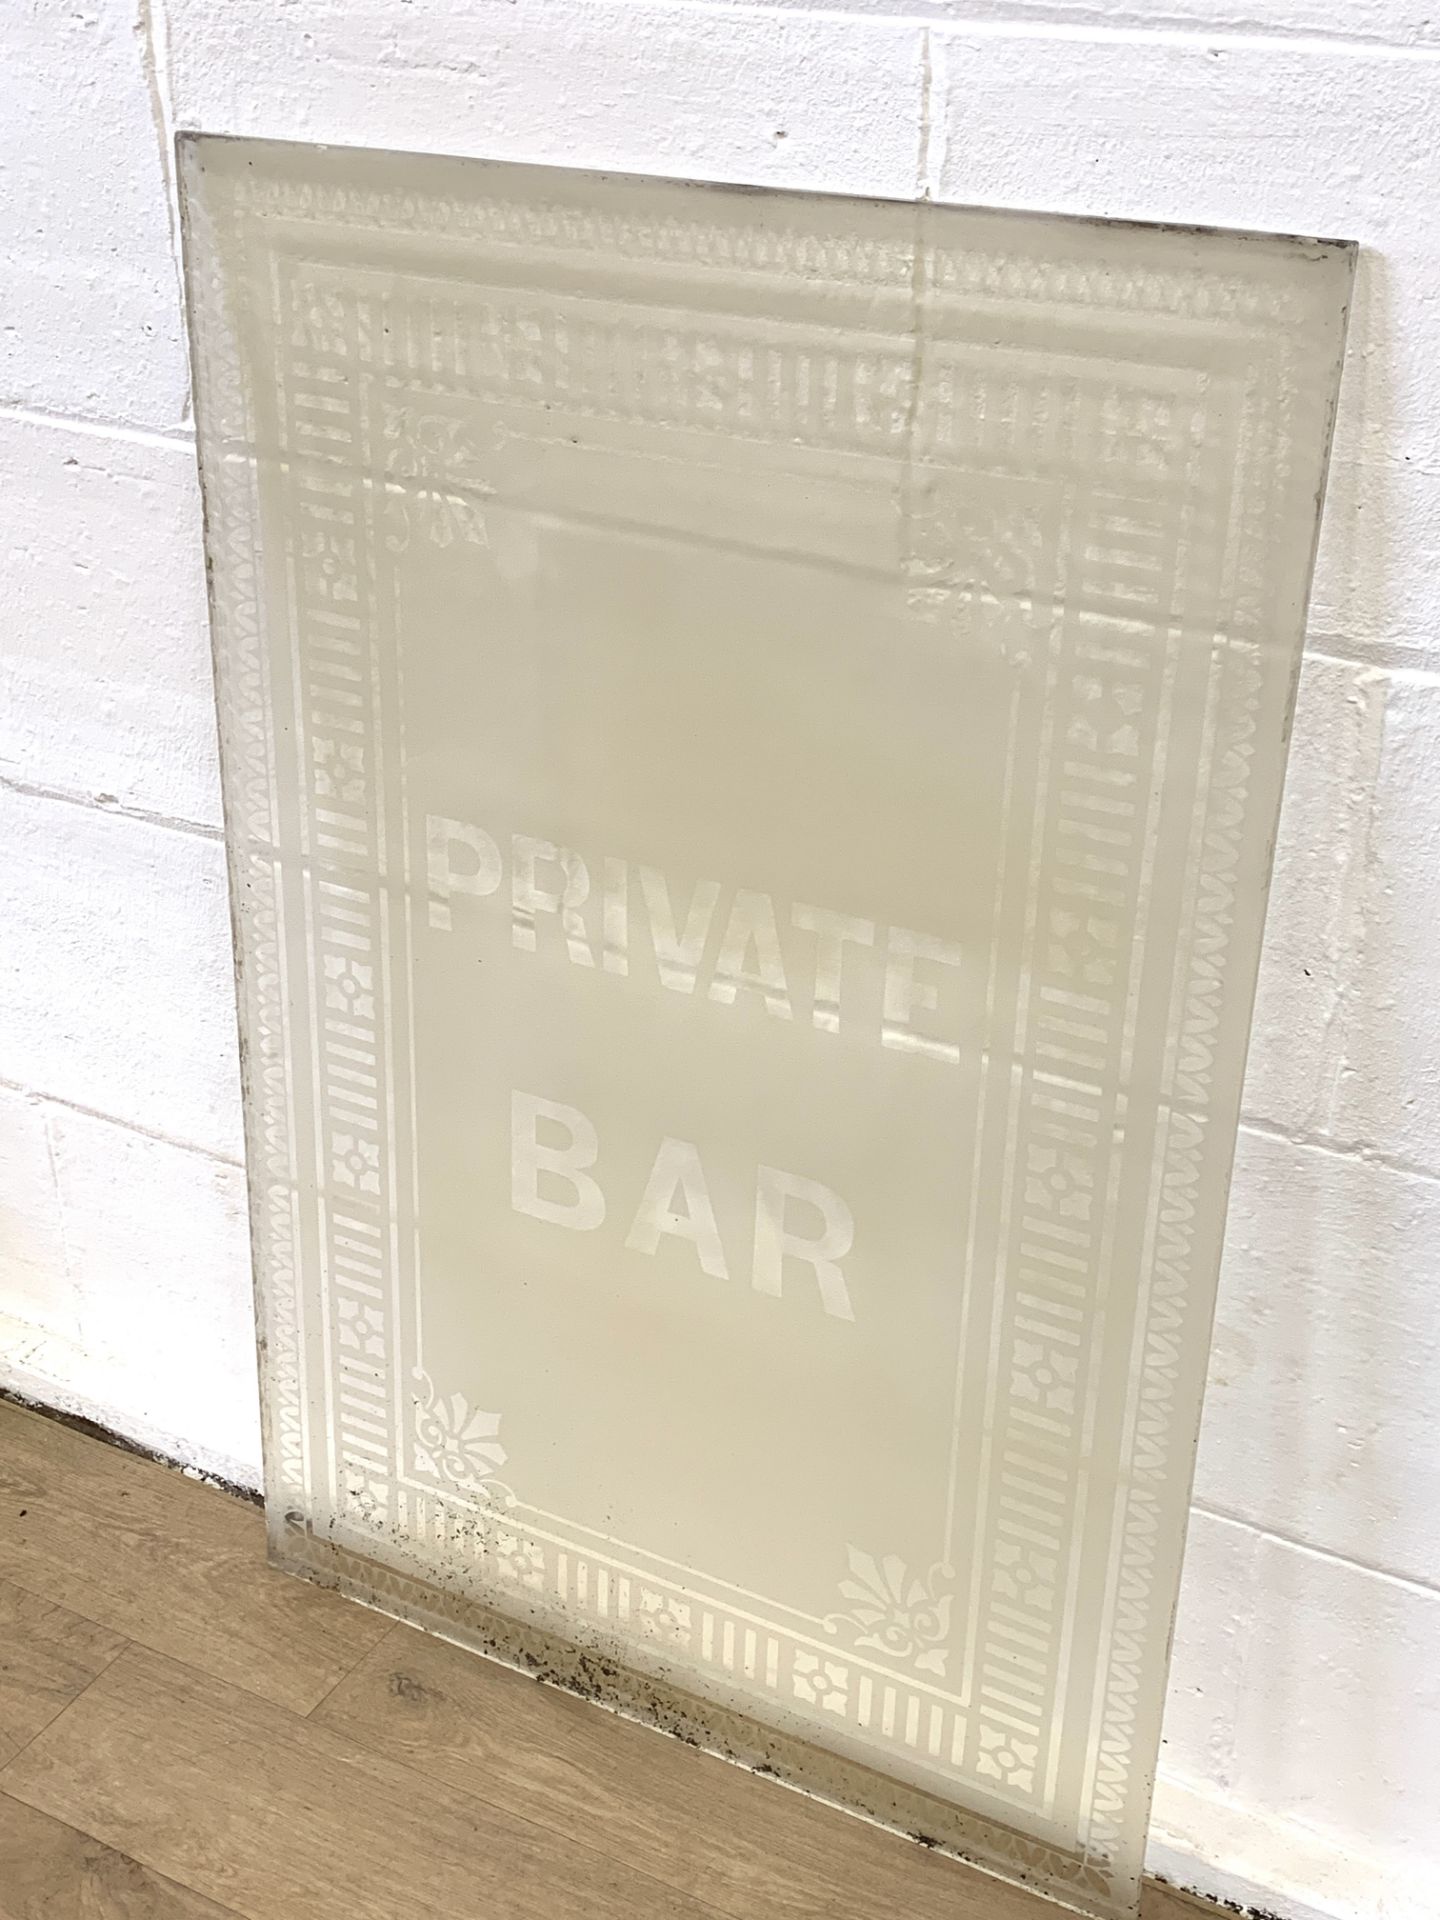 Glass pub sign etched "Private Bar" - Image 4 of 4